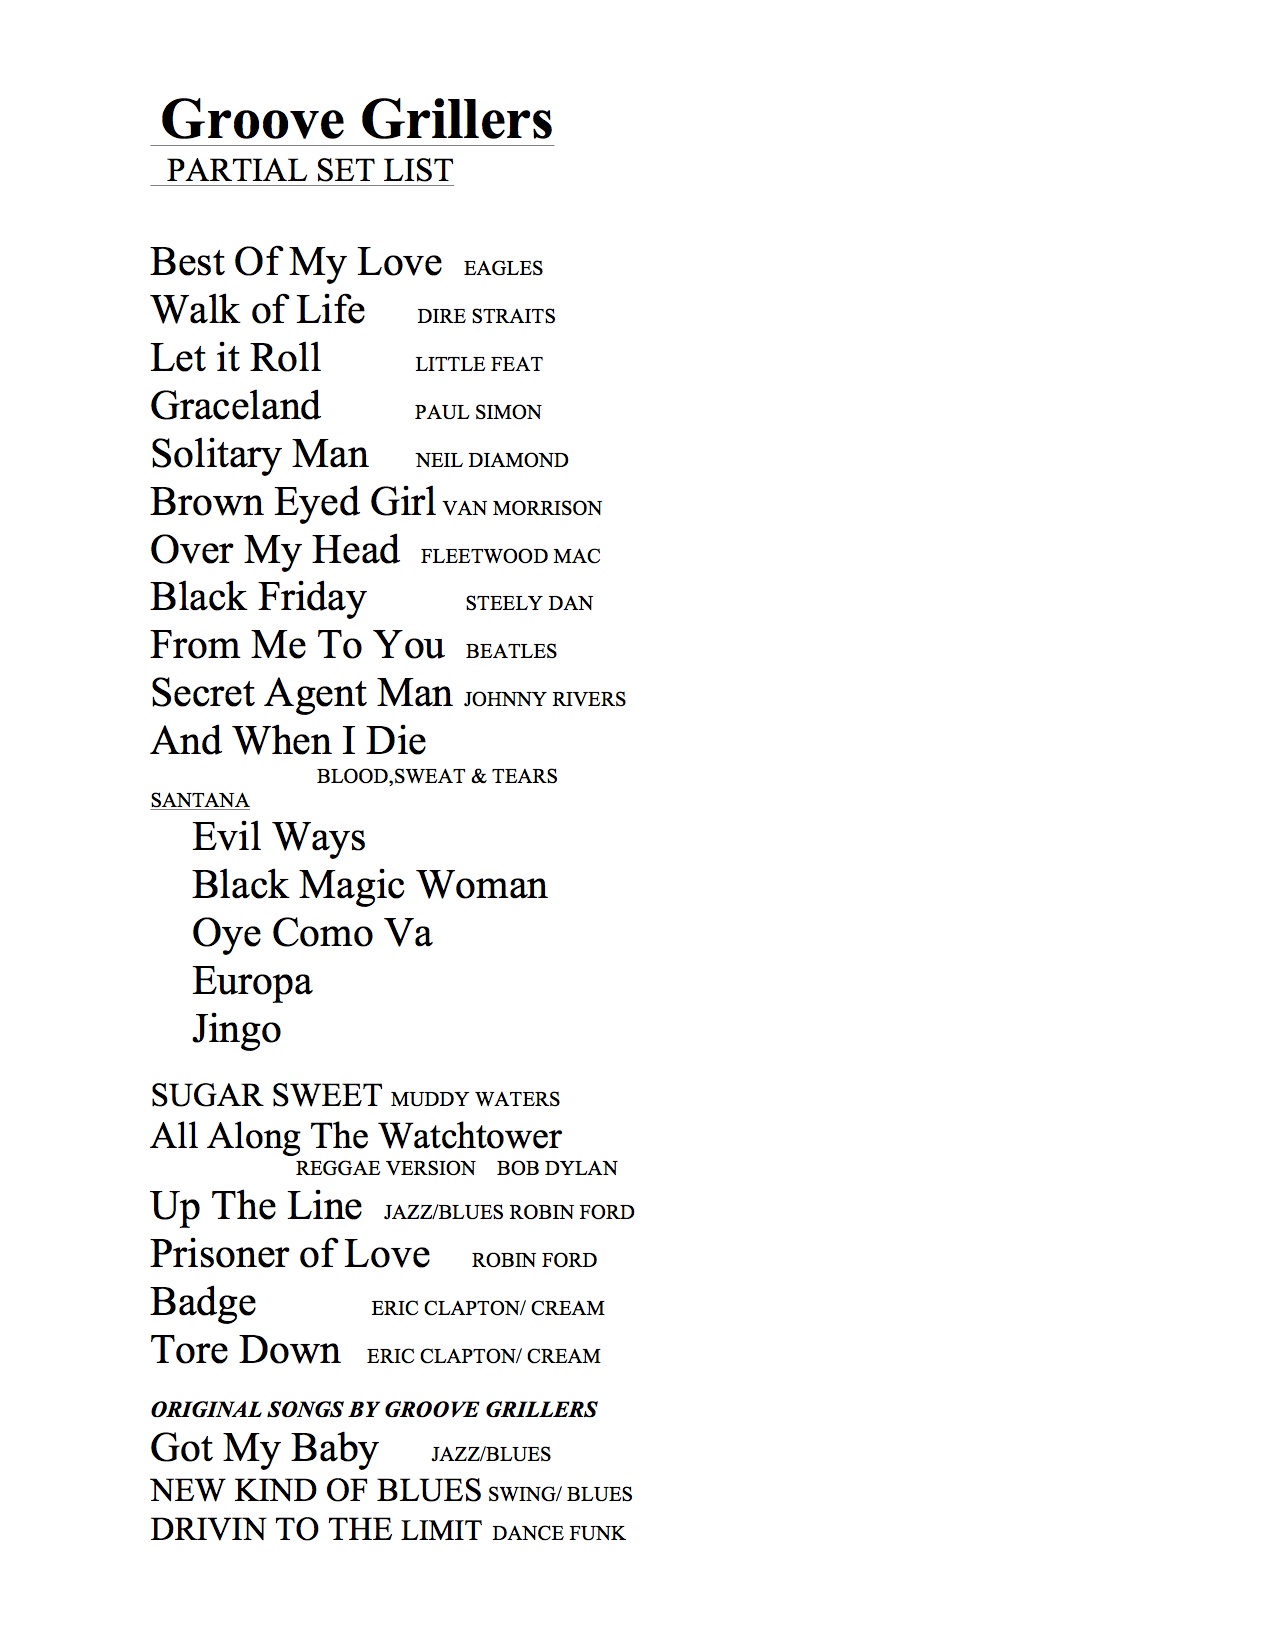 The Groove Grillers songlist